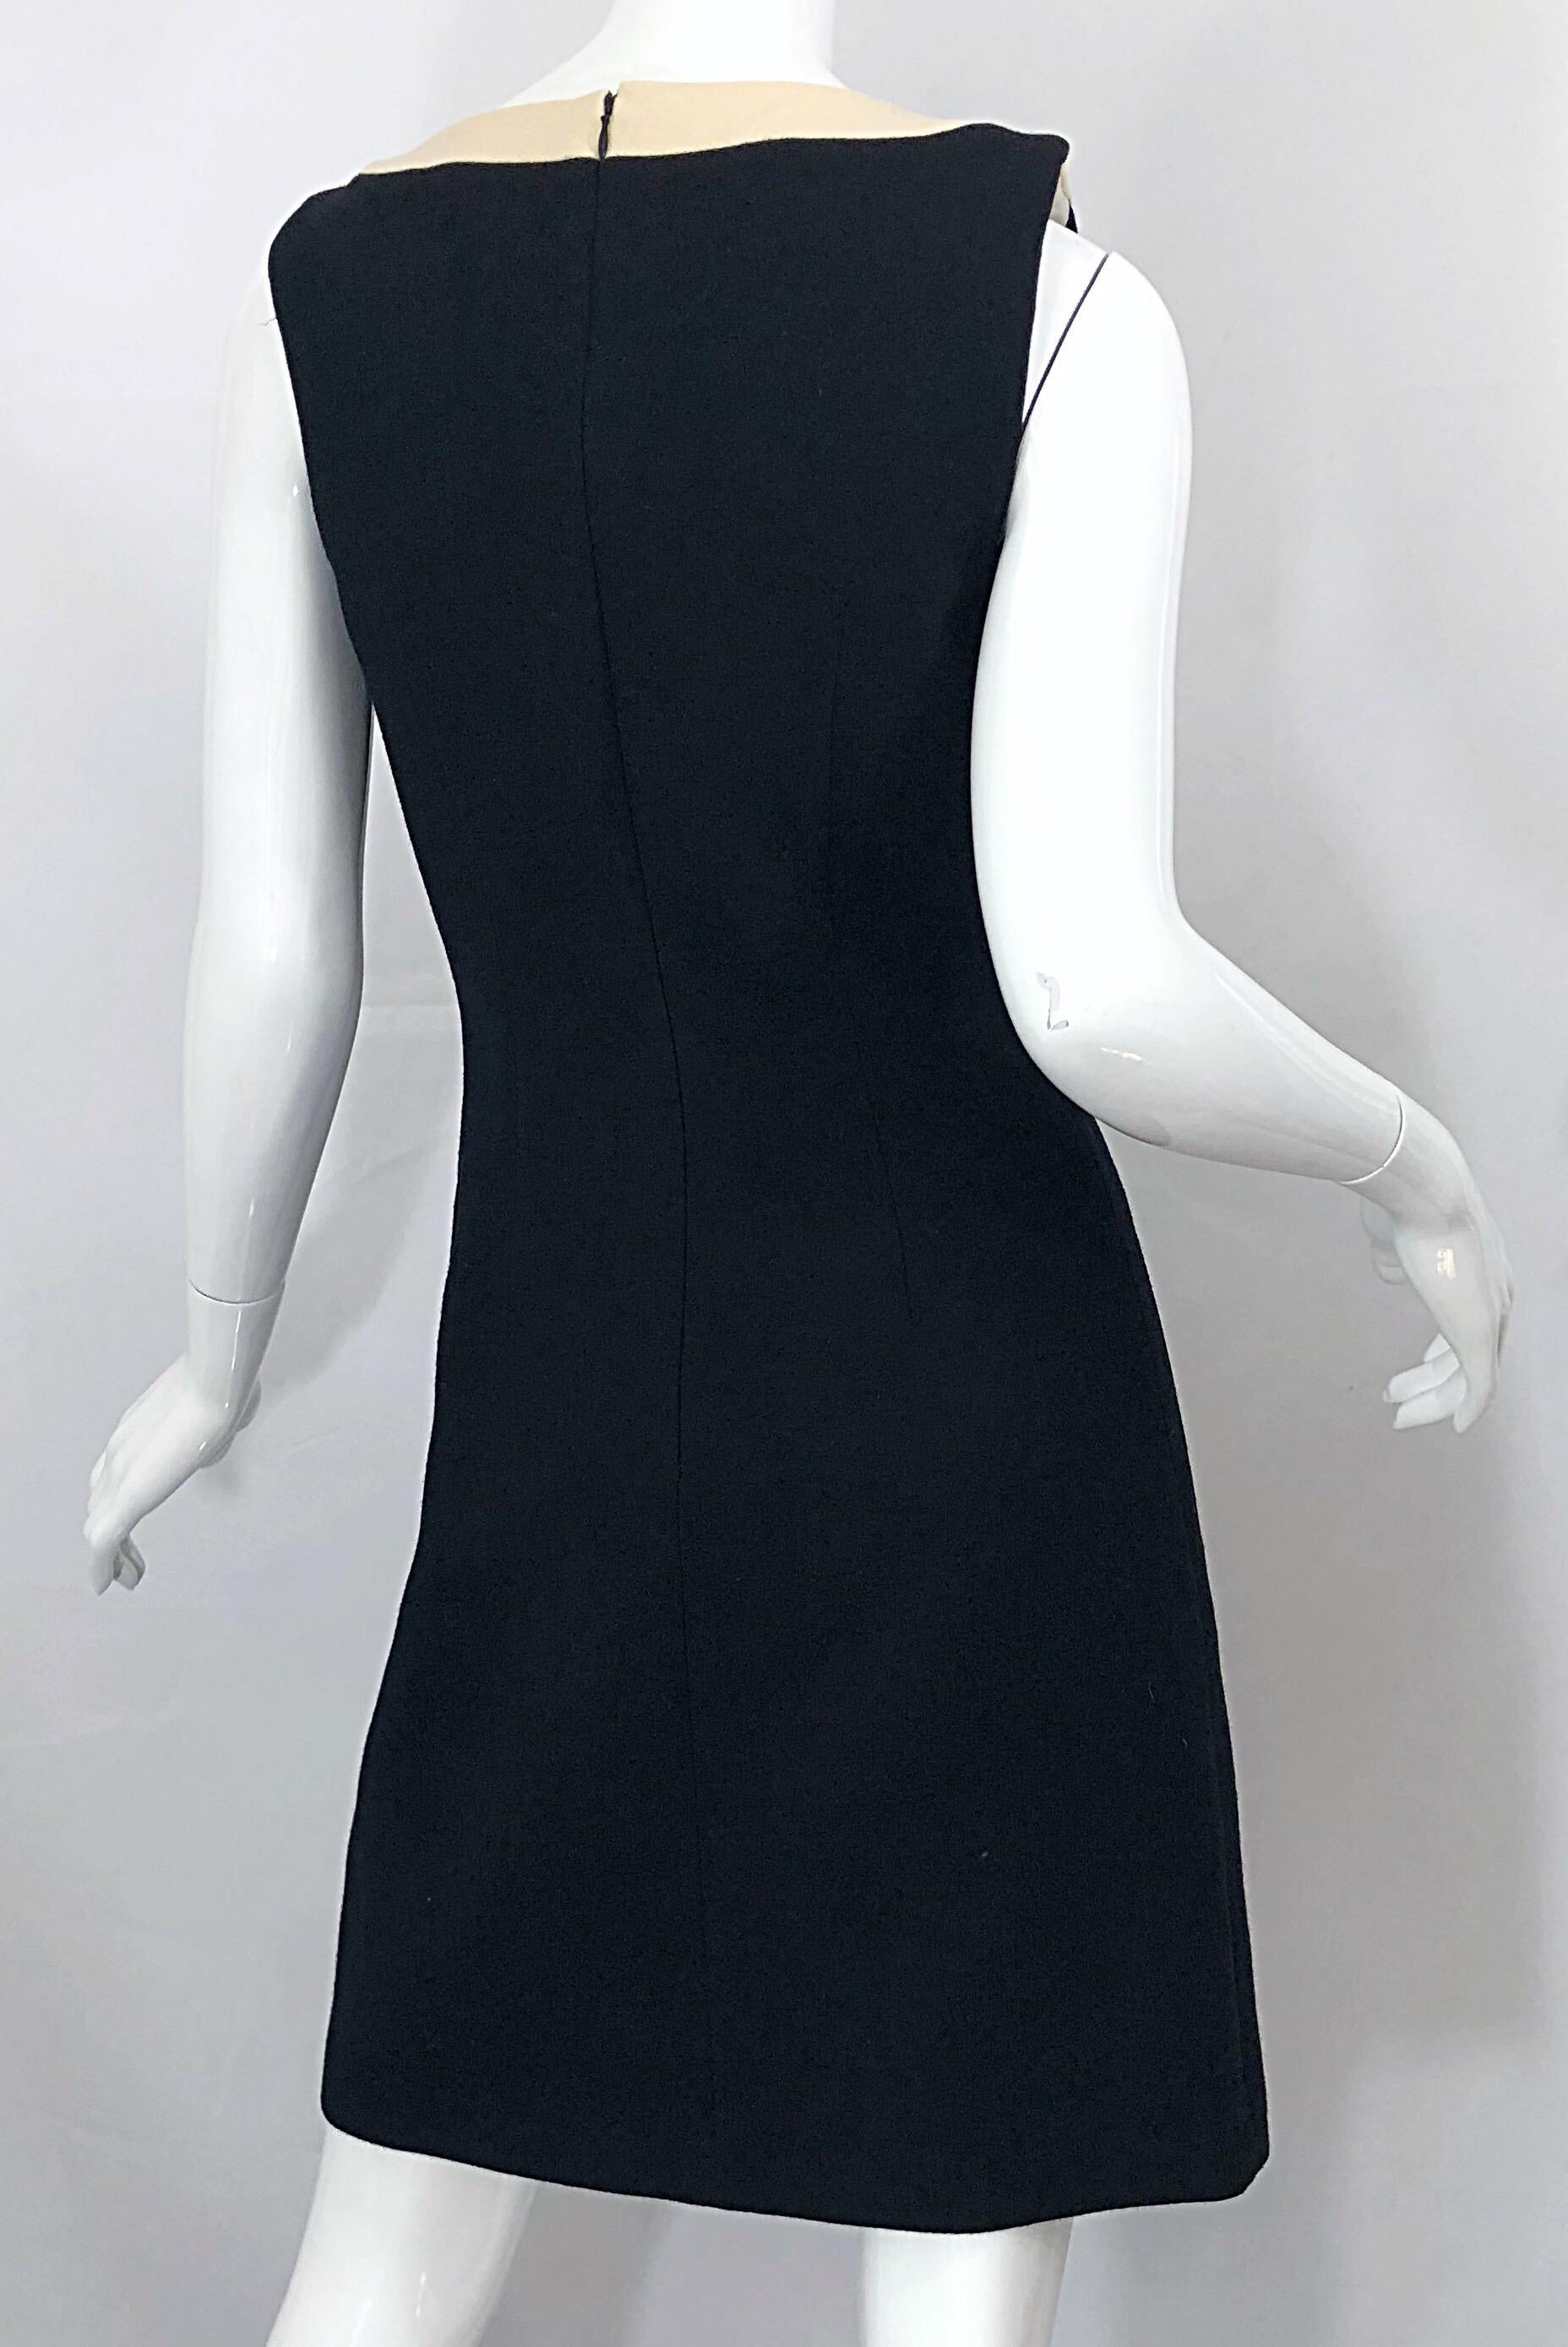 Dolce & Gabbana Size 42 / US 6 Black and Ivory 1990s Does 1960s Wool Shift Dress For Sale 4